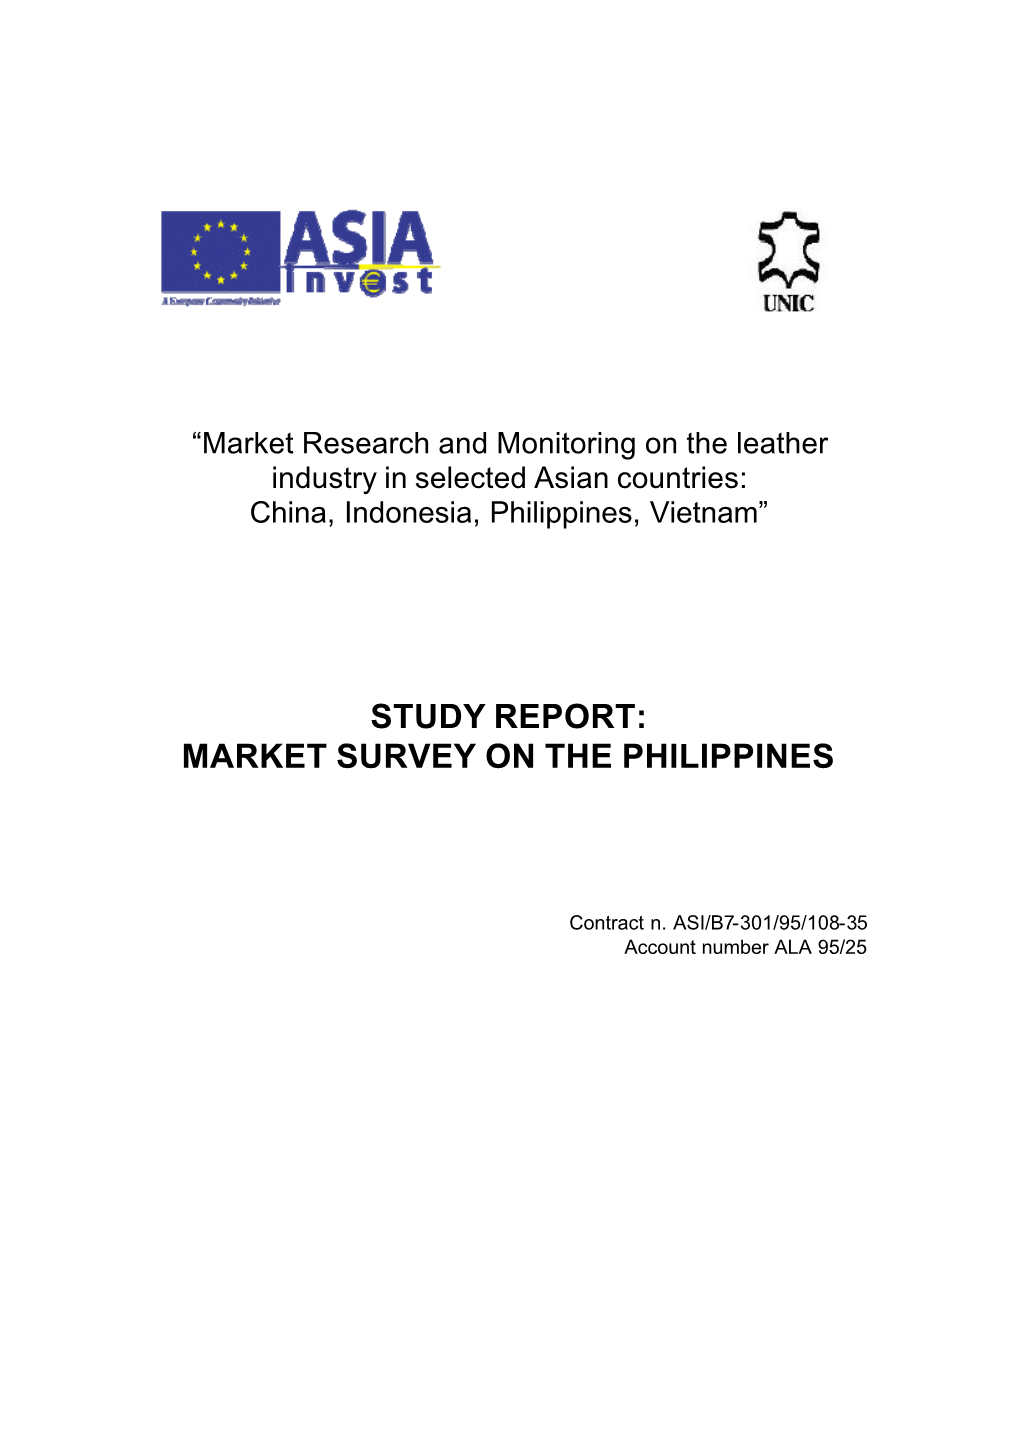 Study Report: Market Survey on the Philippines